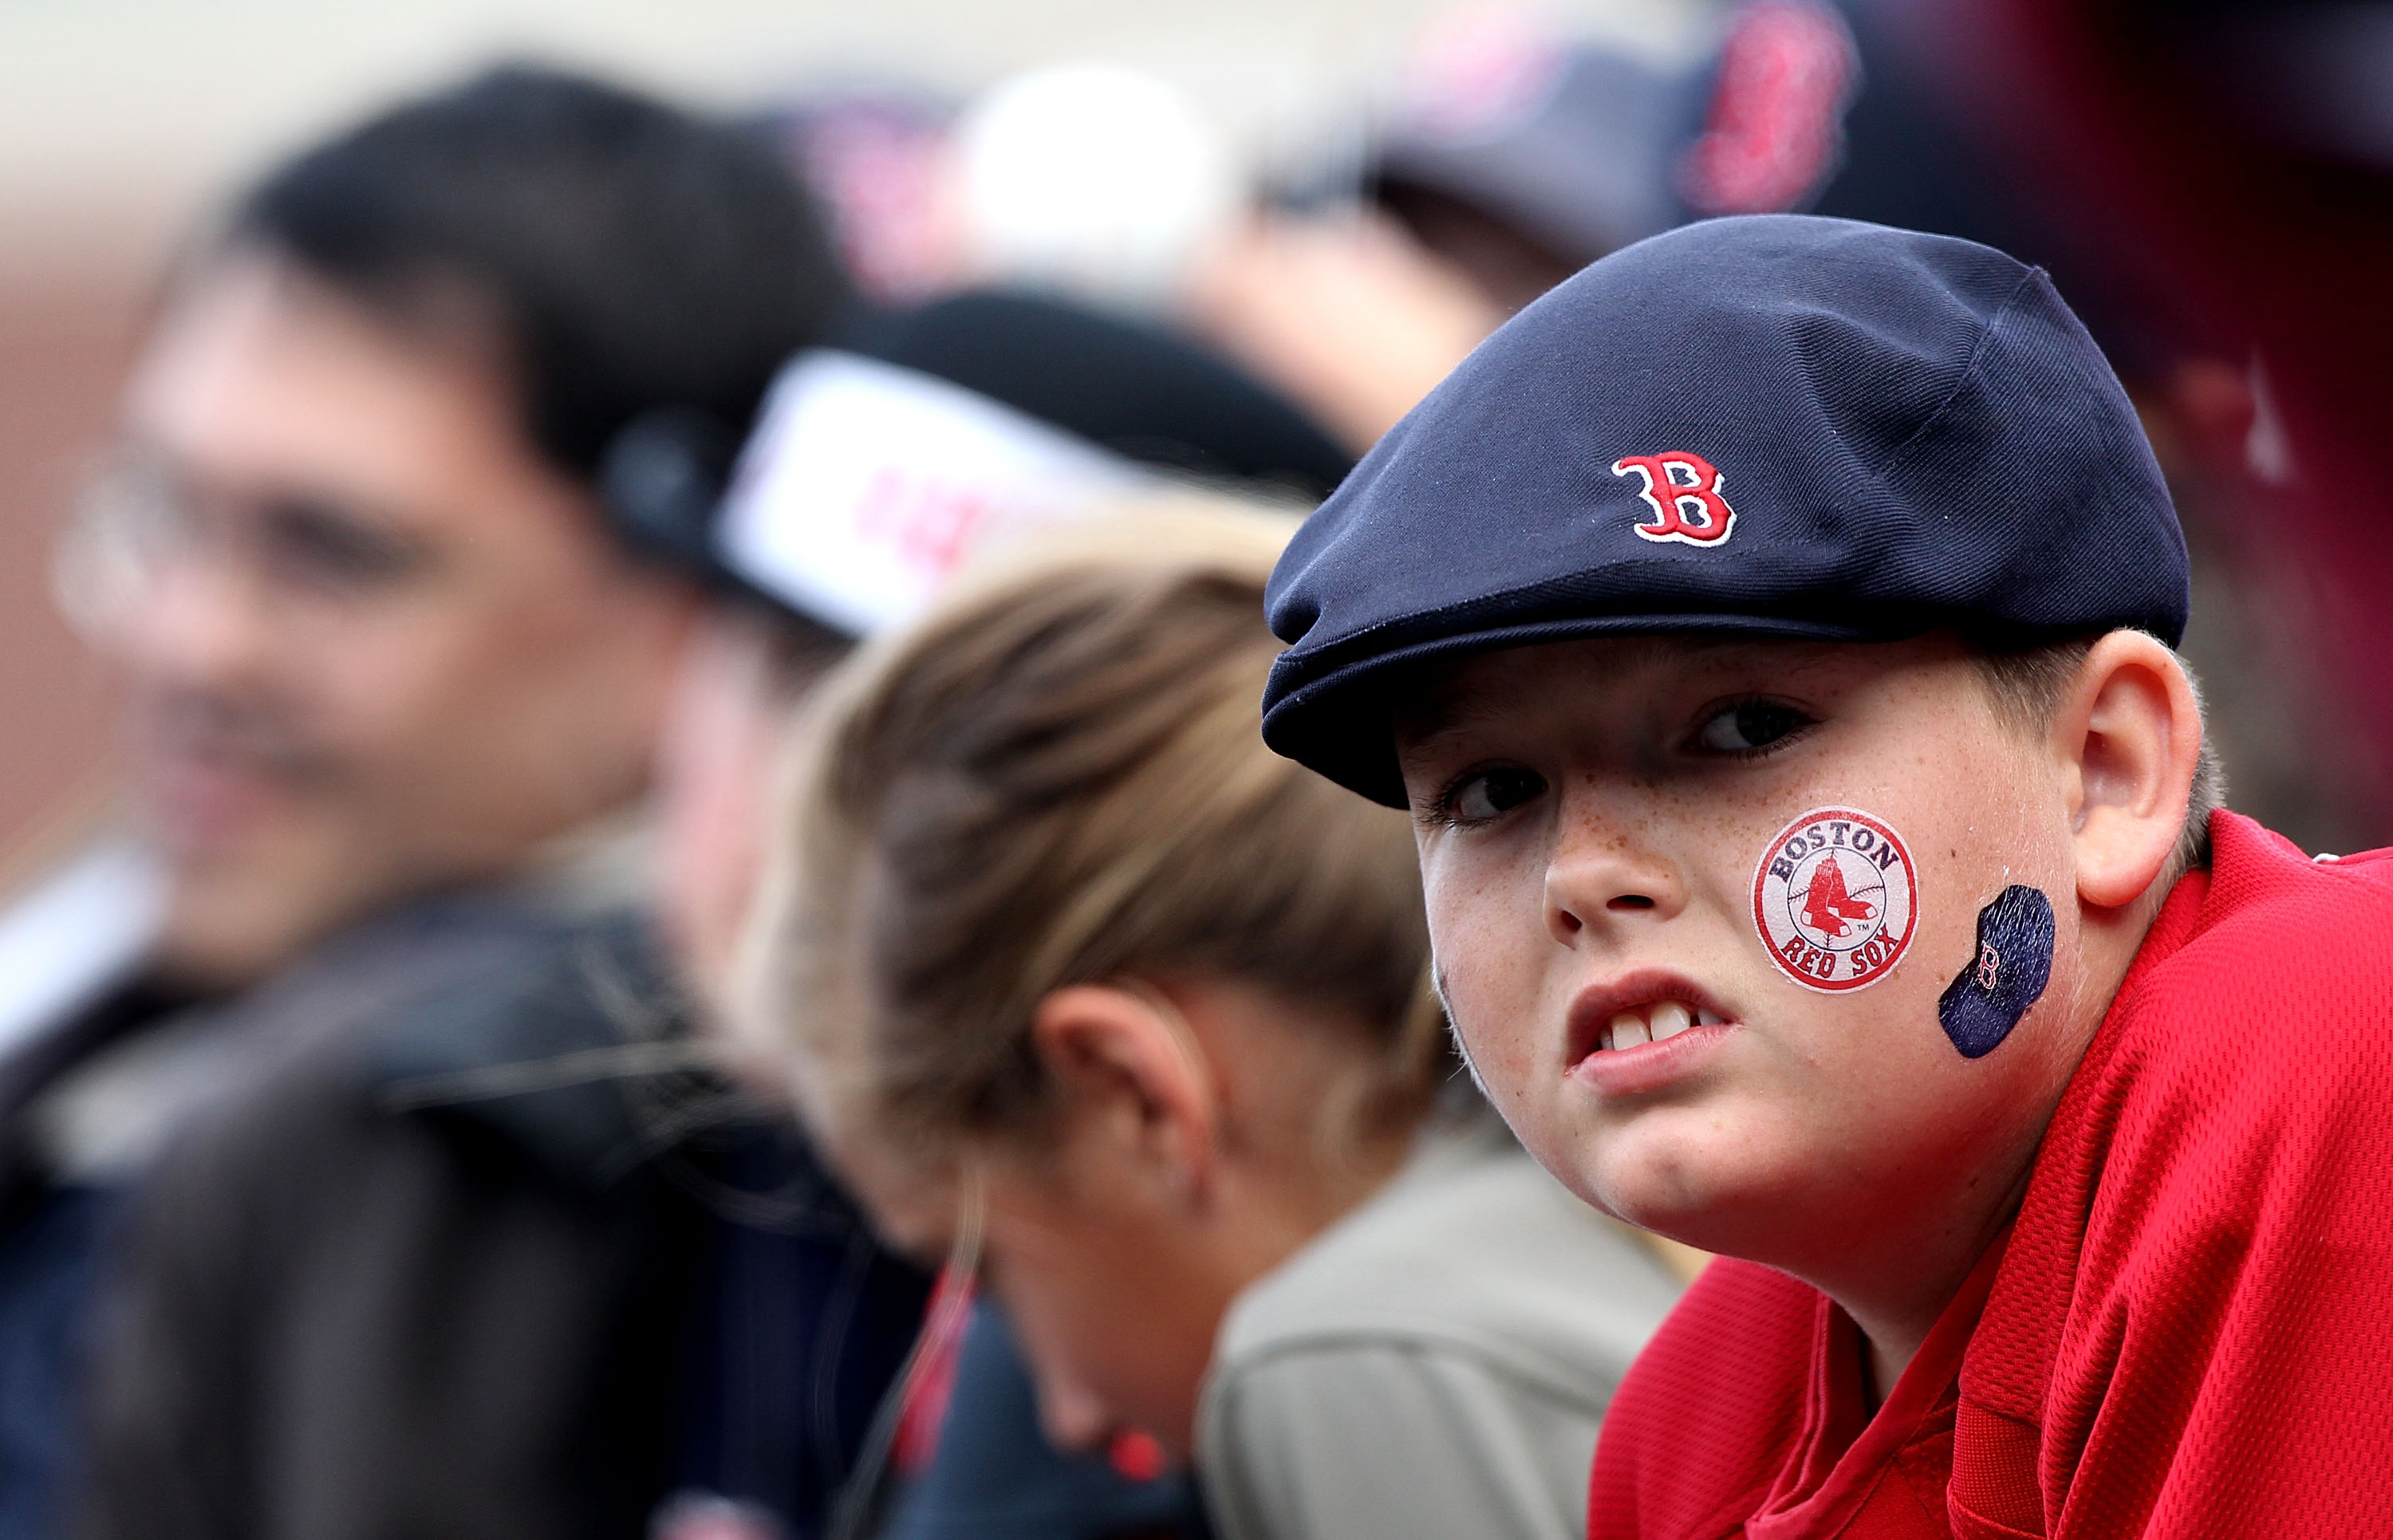 SAN FRANCISCO - JUNE 25:  A fan of the Boston Red Sox looks on against the San Francisco Giants during an MLB game at AT&T Park on June 25, 2010 in San Francisco, California.  (Photo by Jed Jacobsohn/Getty Images)